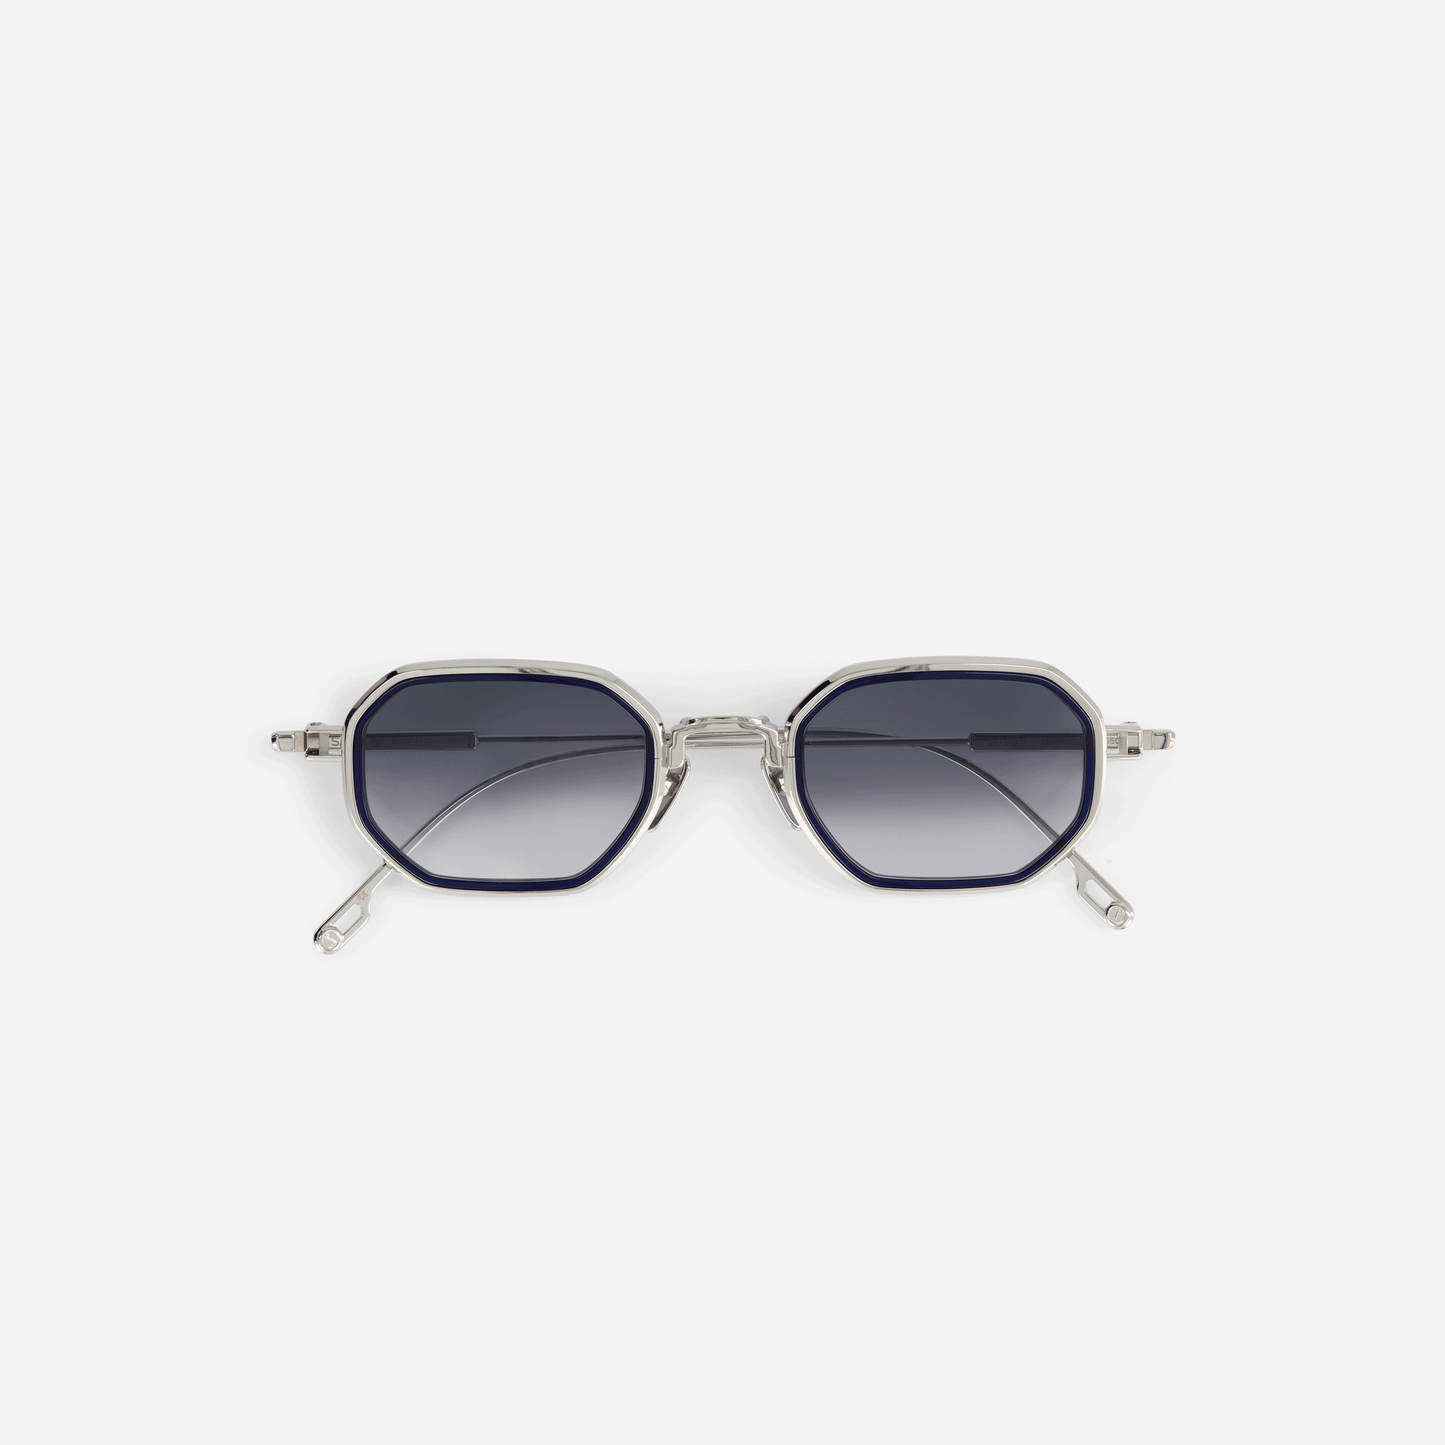 Timir-T S5501 hexagonal glasses. These limited edition frames are meticulously crafted from pure palladium titanium, featuring stylish grey gradient tinted lenses and a captivating midnight blue Takiron insert for a truly unique and exclusive eyewear experience.